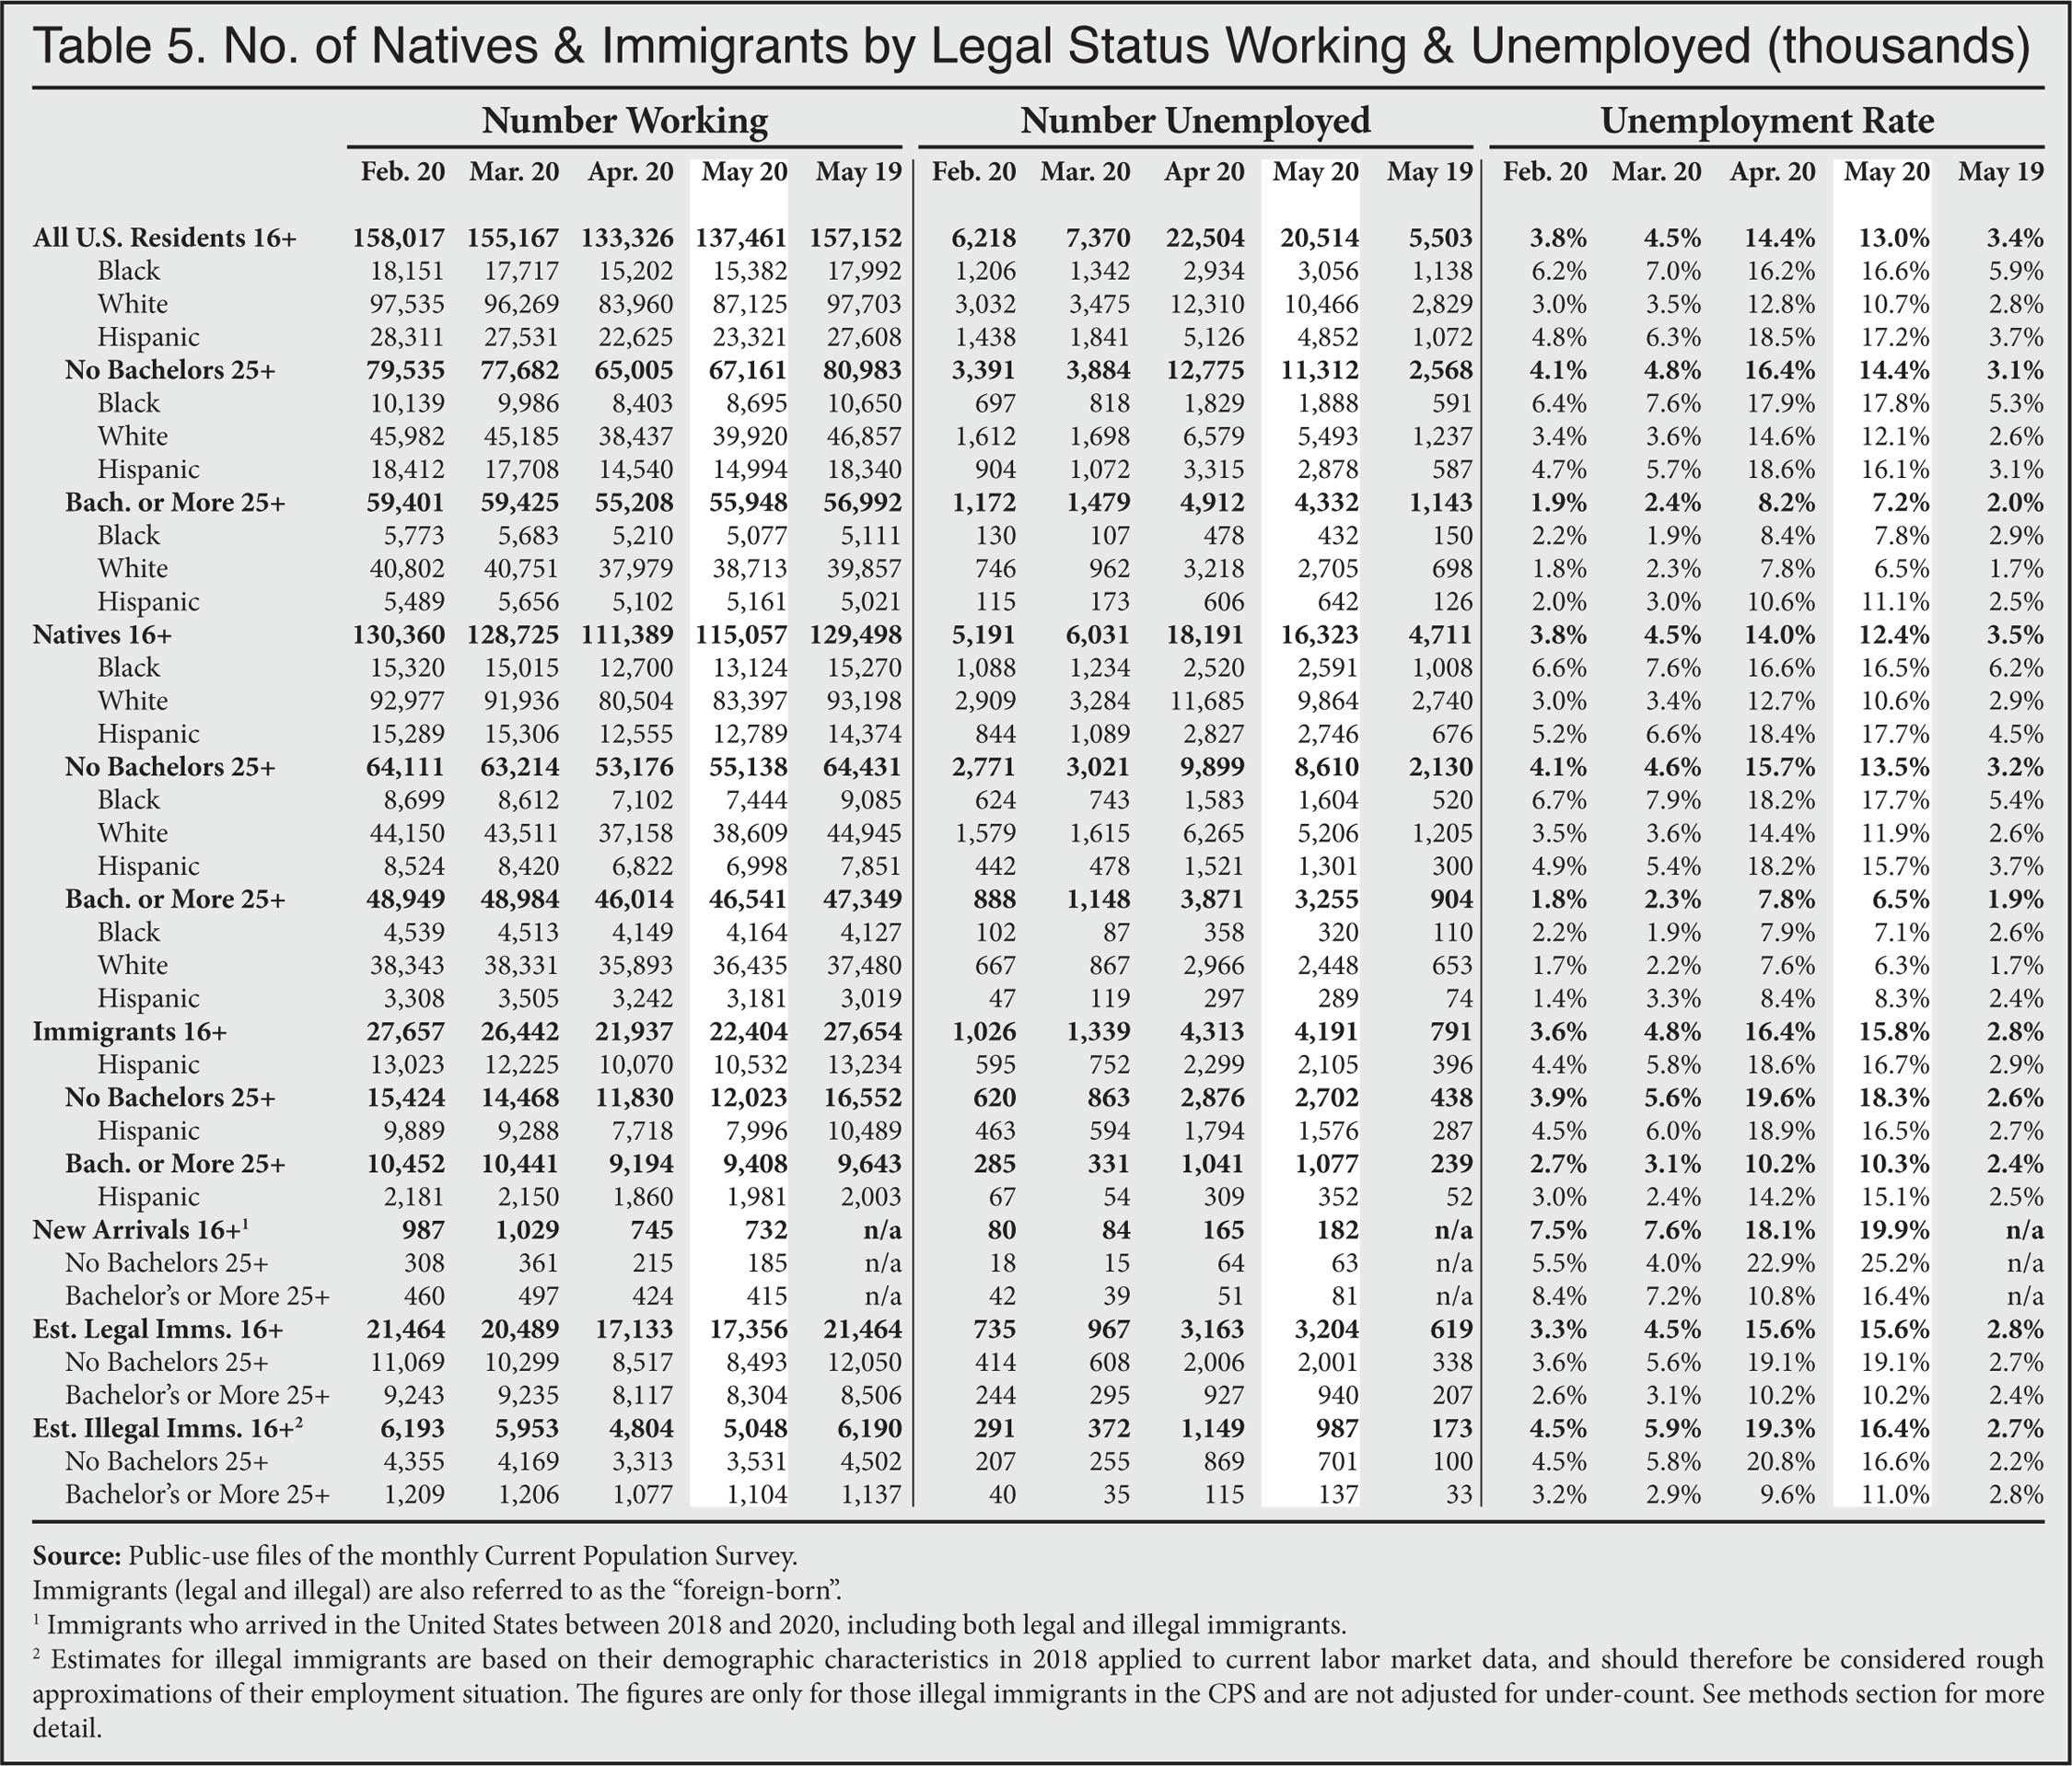 Table: Number of Natives and Immigrants by Legal Status Working and Unemployment, 2020